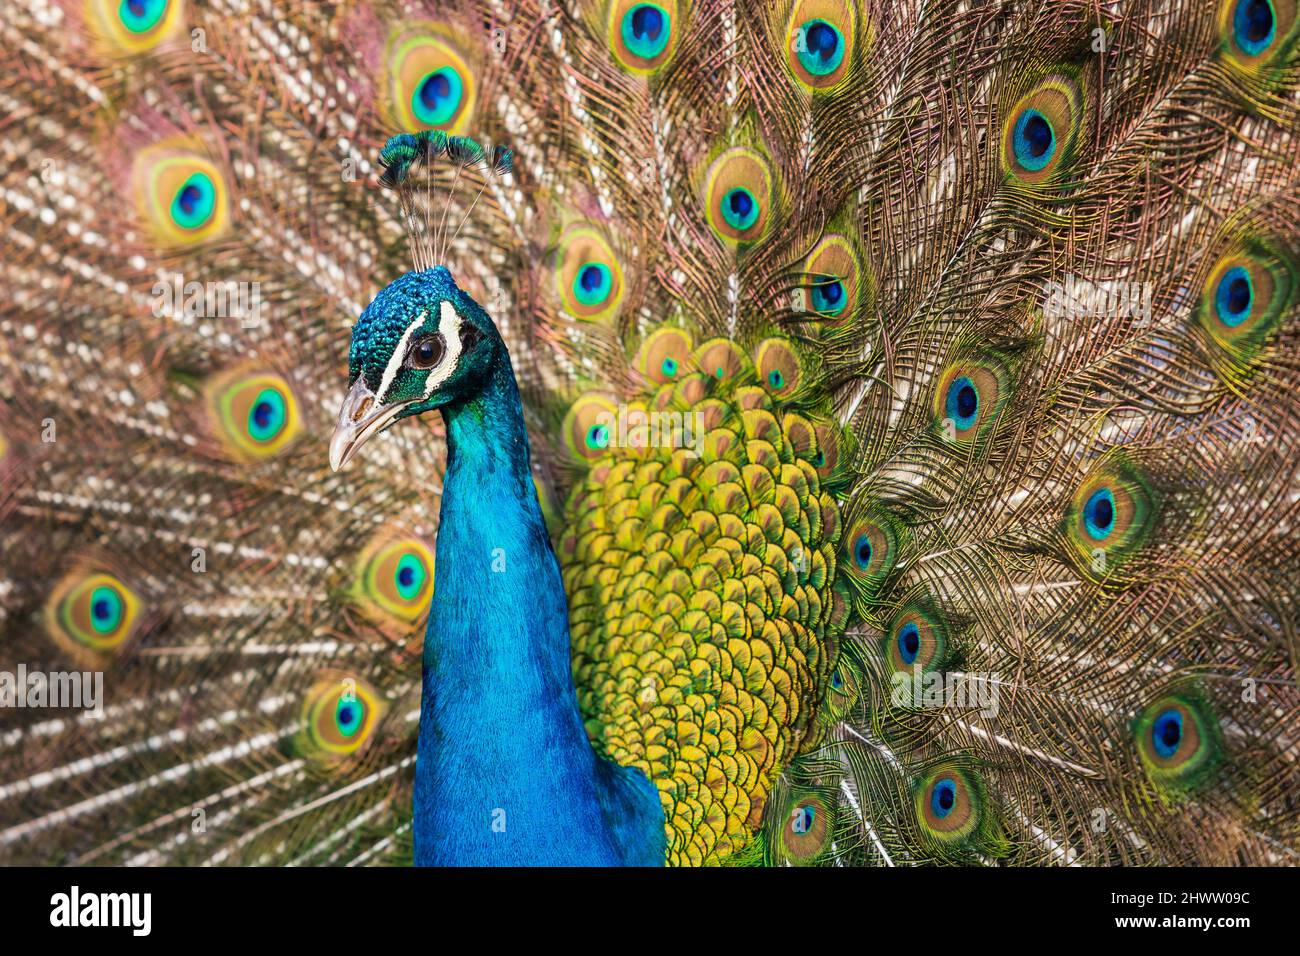 The beautiful colorful peacock bird has an outstretched tail. Stock Photo